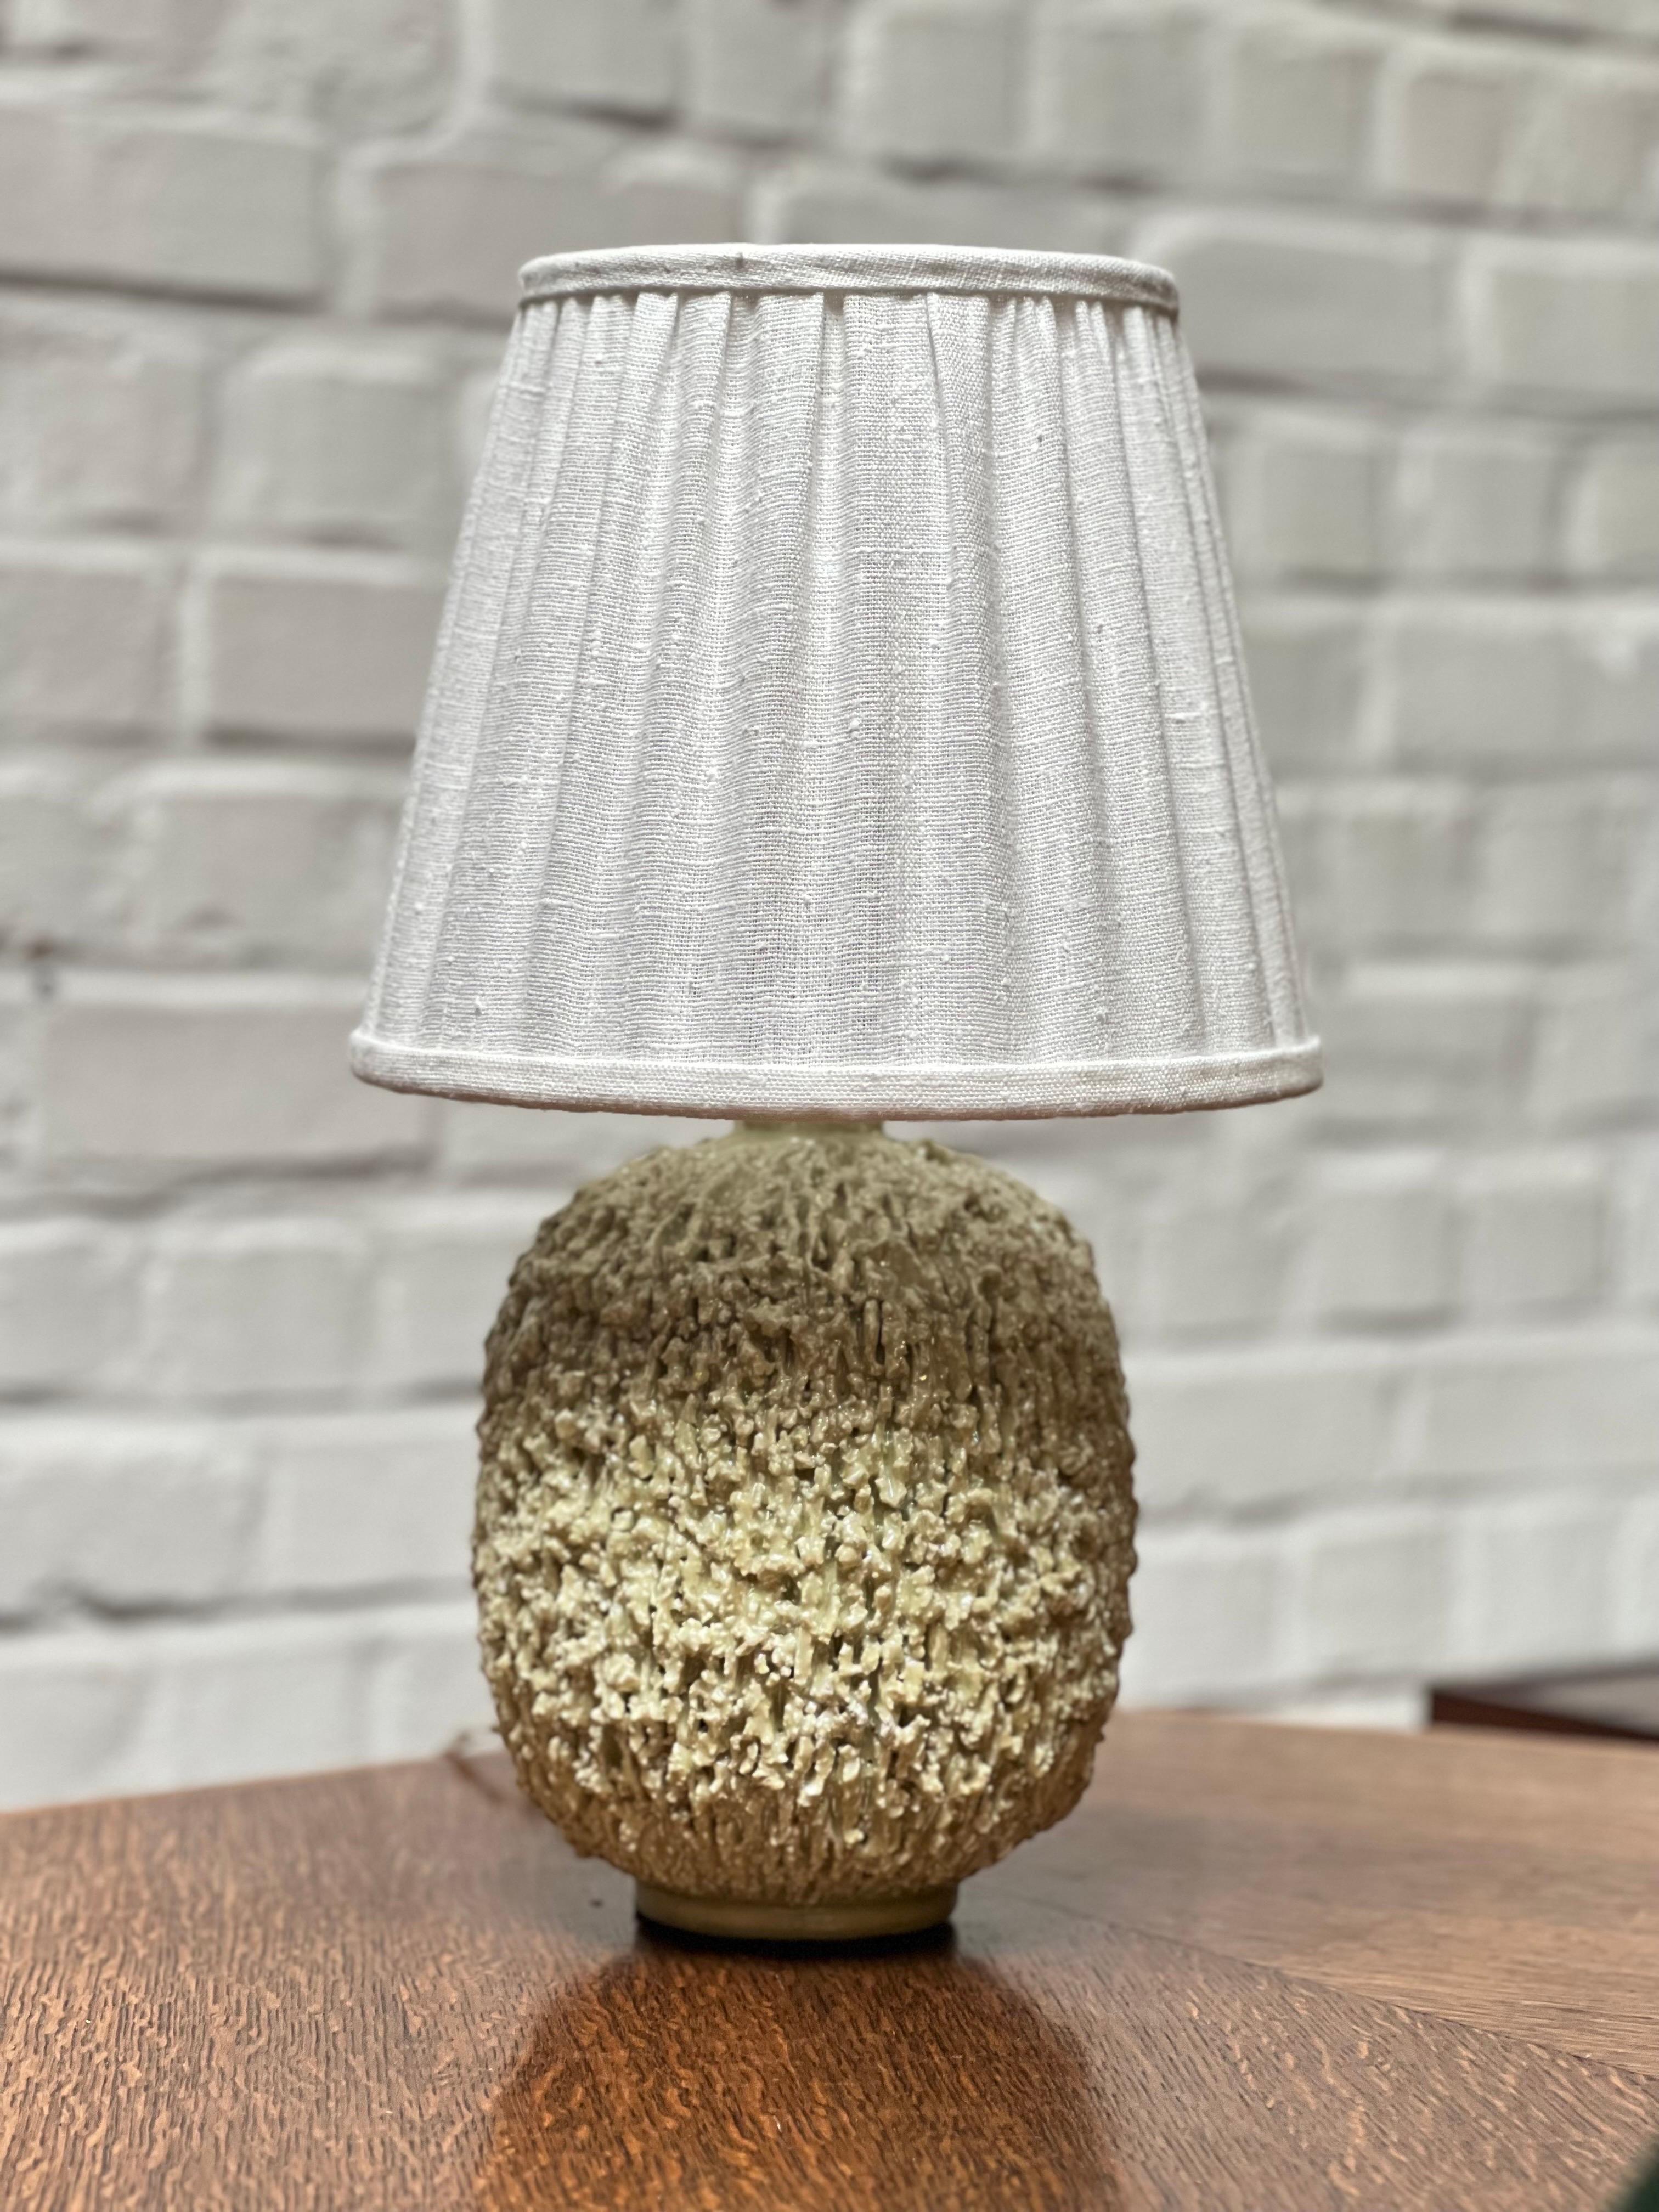 This is a real lamp in mother of pearl finish by Swedish master ceramicist Gunnar Nylund. Made in 1936. It's a real lamp not as most of them a vase transformed as a lamp. There's a new high quality white linen shade, made on measurements to fit the